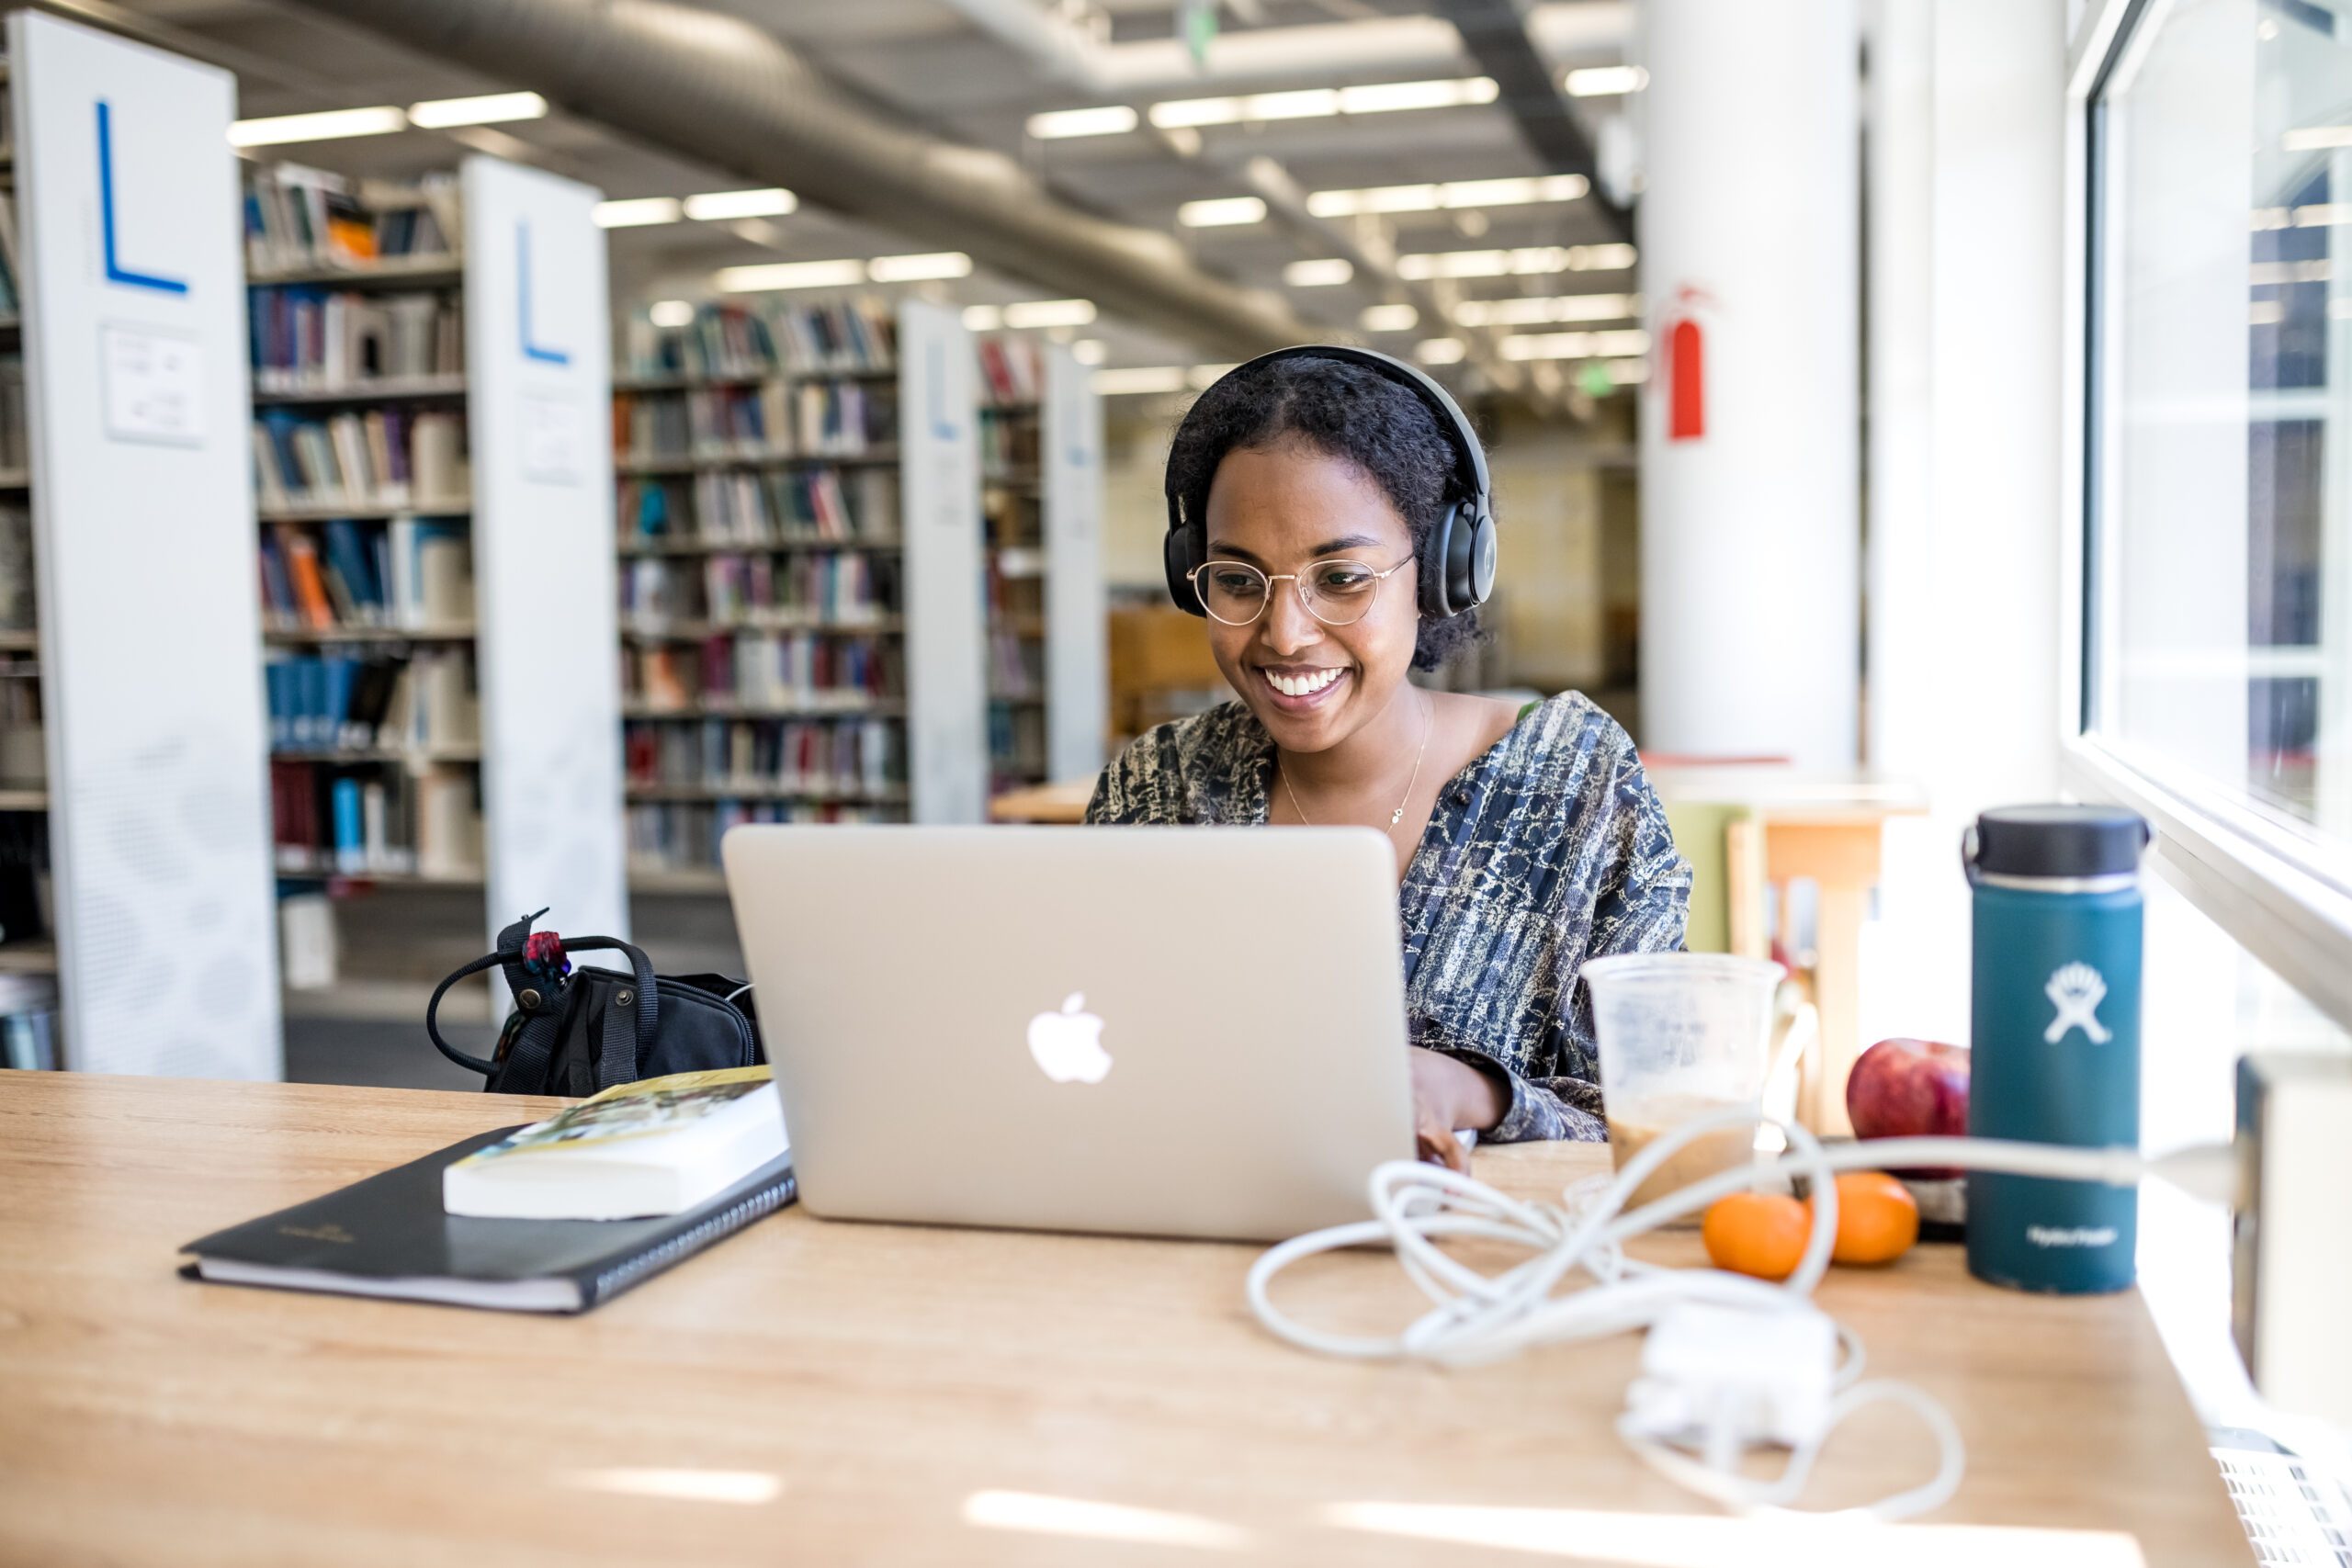 Image of a student sitting in front of a computer with headphones on in the library, smiling.